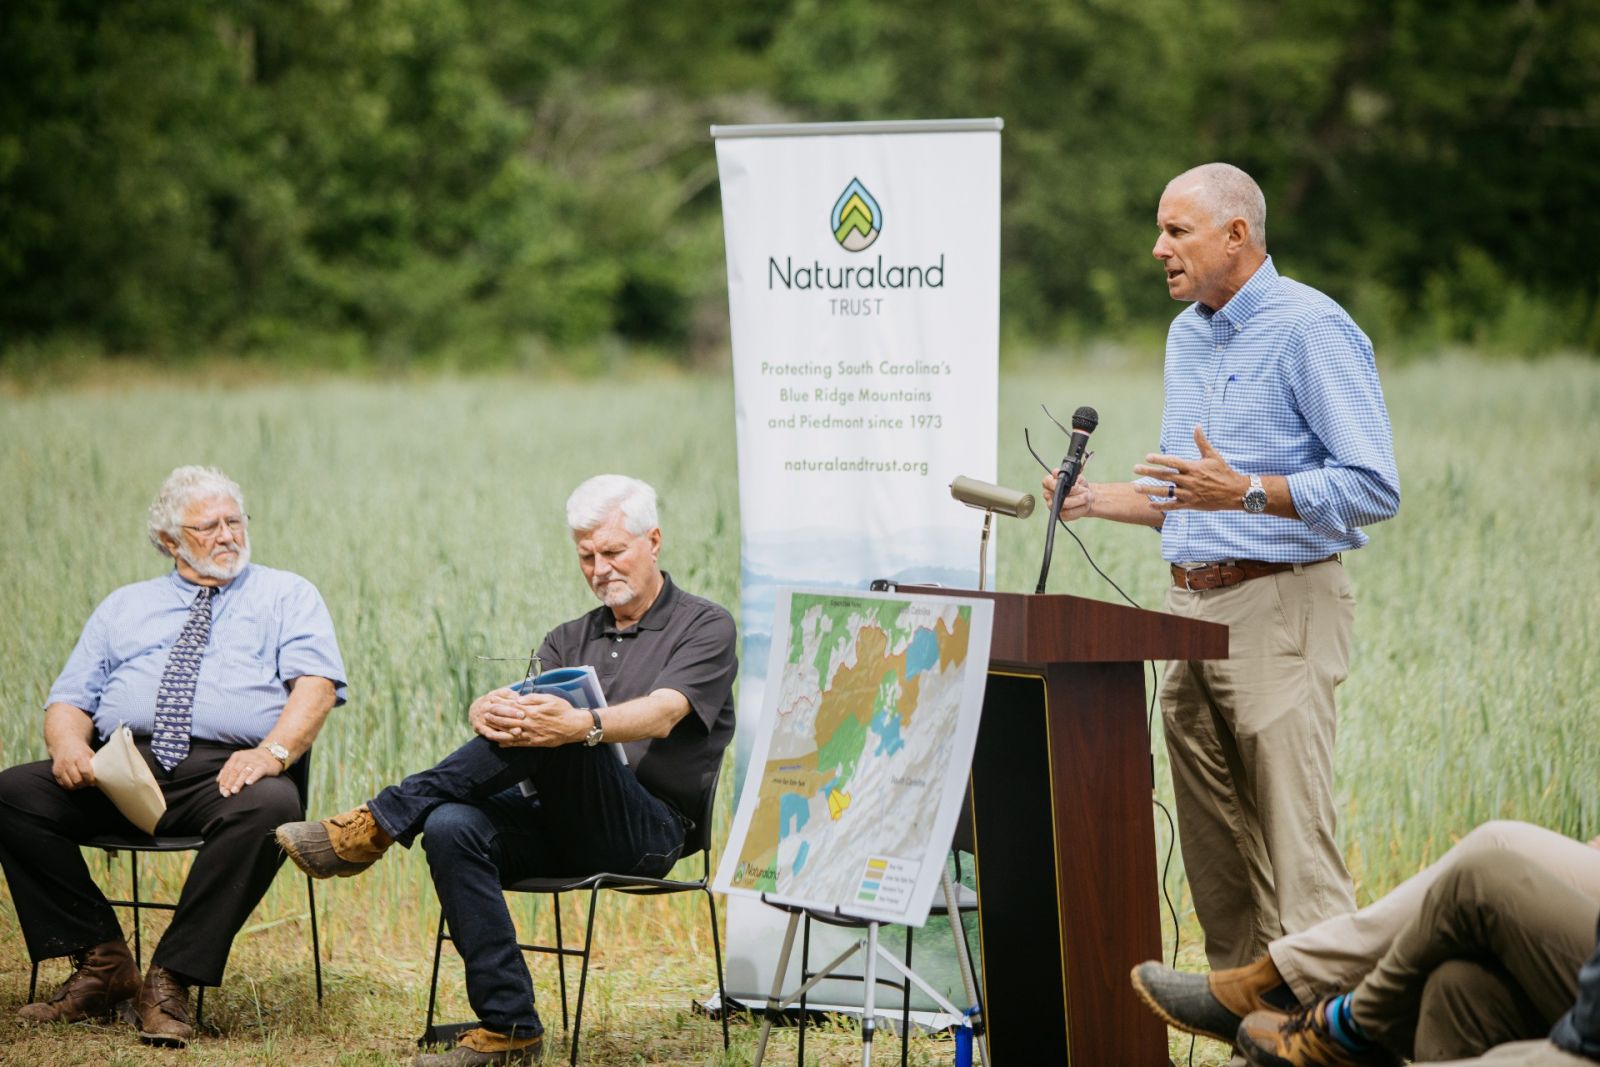 Ledbetter address the crowd, including Greenville County Councilmember Joe Dill and Carlton Owens of the Greenville County Historic and Natural Resources Trust, at a May 24 press conference celebrating the conservation of the property. (Photo/Mac Stone)